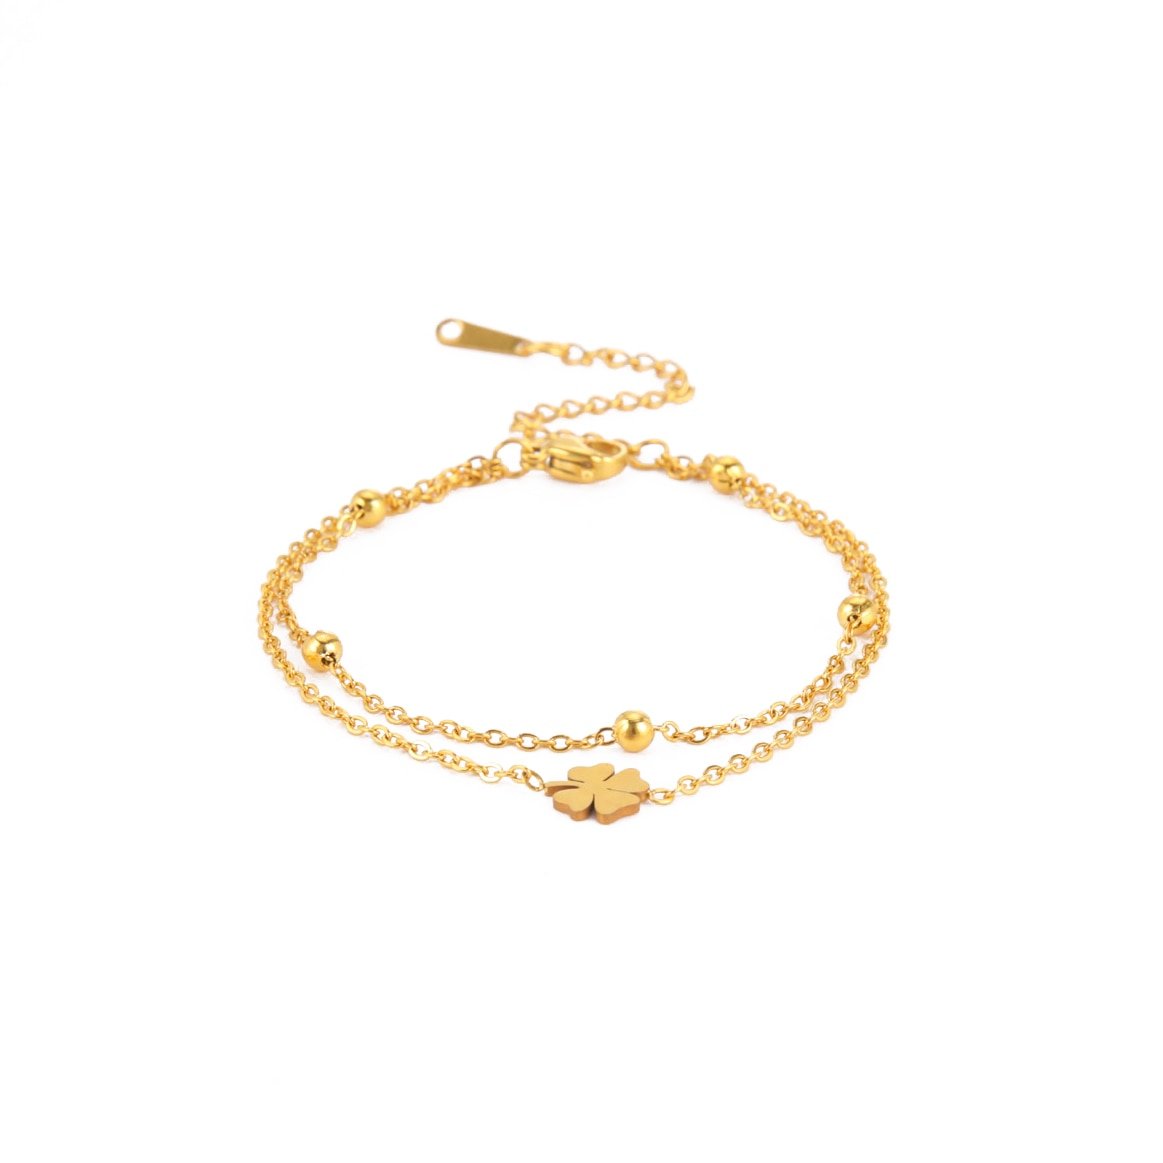 Leaf Clover Anklet - M&H FashionLeaf Clover AnkletM&H FashionM&H Fashion200001034:361181#Clover Gold colorClover Gold colorLeaf Clover AnkletM&H FashionM&H FashionThis Leaf Clover Anklet is the perfect accessory for any occasion. Its simple yet exquisite design is sure to turn heads. Crafted from stainless steel, it is both duLeaf Clover Anklet